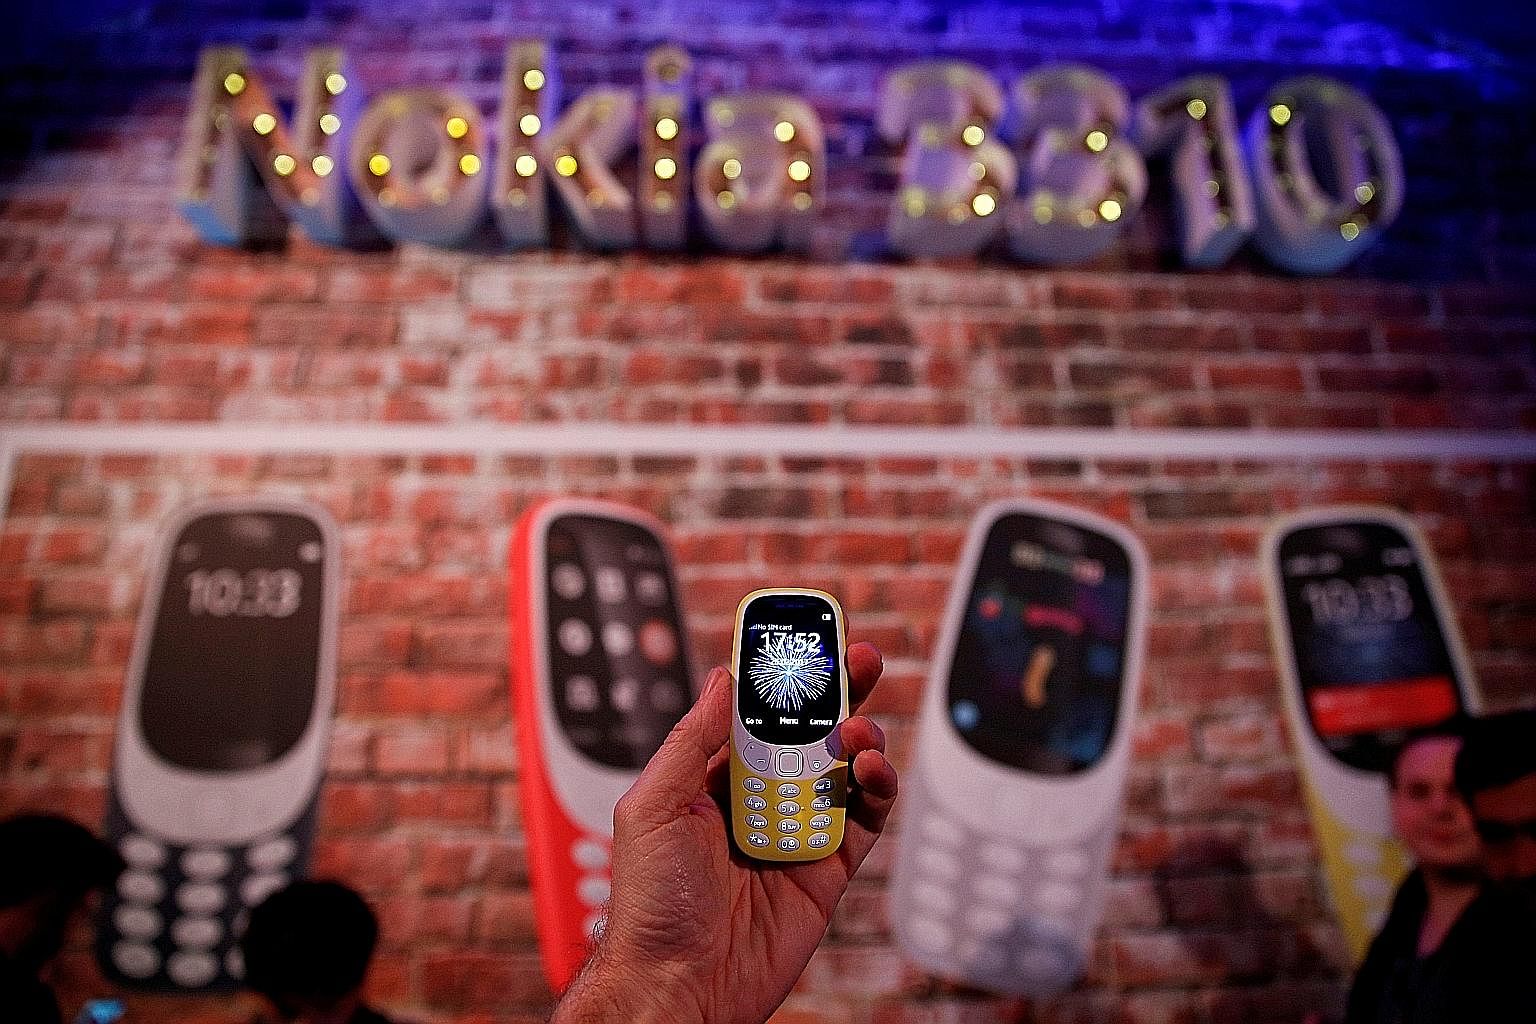 A Nokia 3310 being presented at the Mobile World Congress in Barcelona, Spain, in February. The phone, one of two new devices which went on sale in Singapore this month, is a reboot of the feature phone with the same name from 2000.